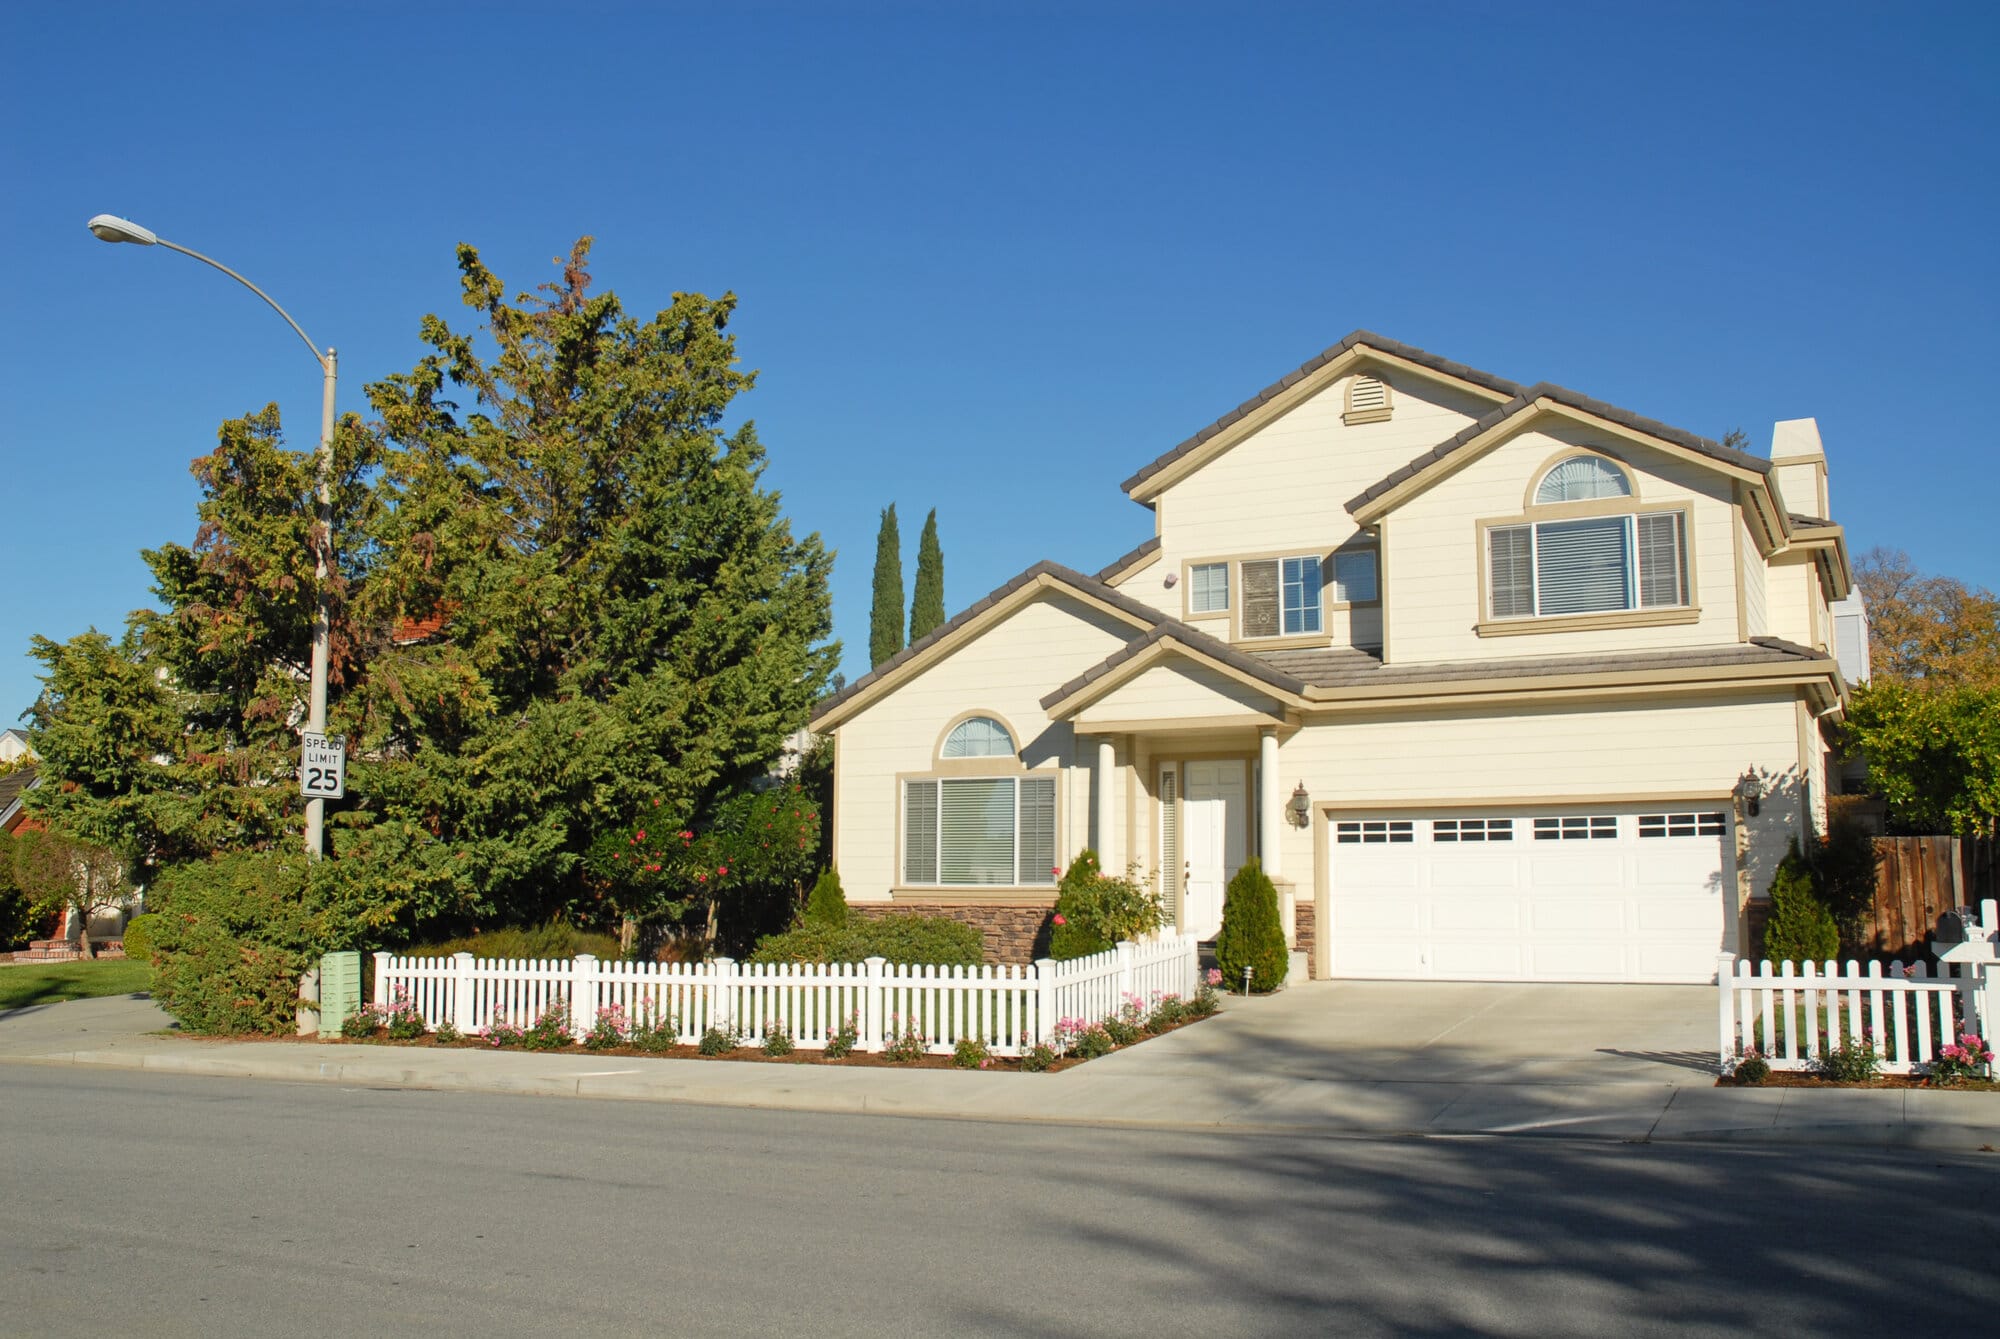 A California home painted cream with white picket fence and large green trees.